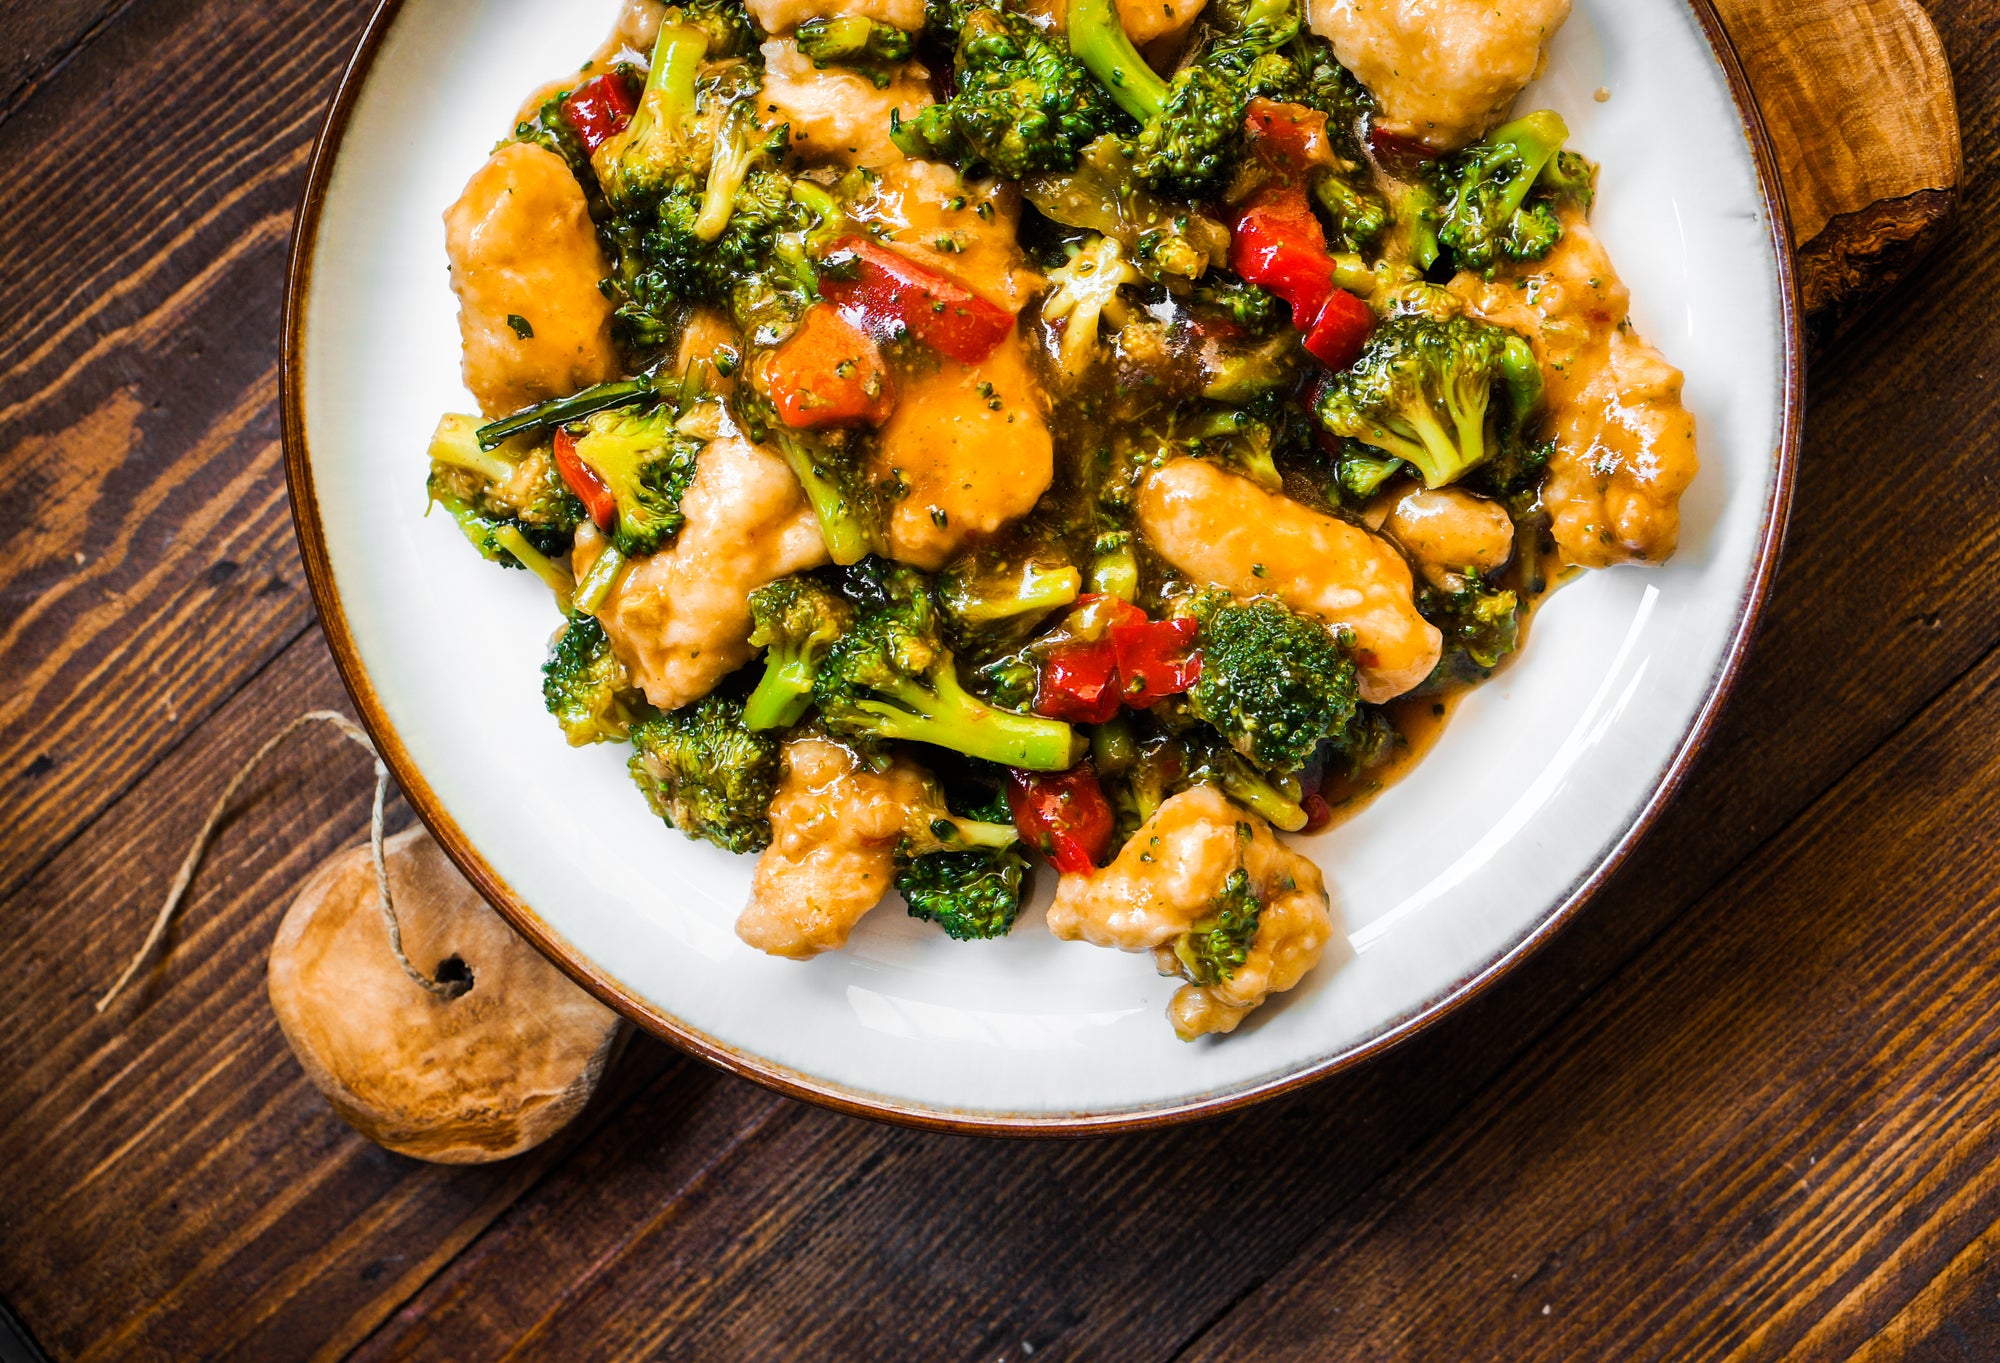 Chicken Satay & Broccoli with Almond Butter Sesame Sauce